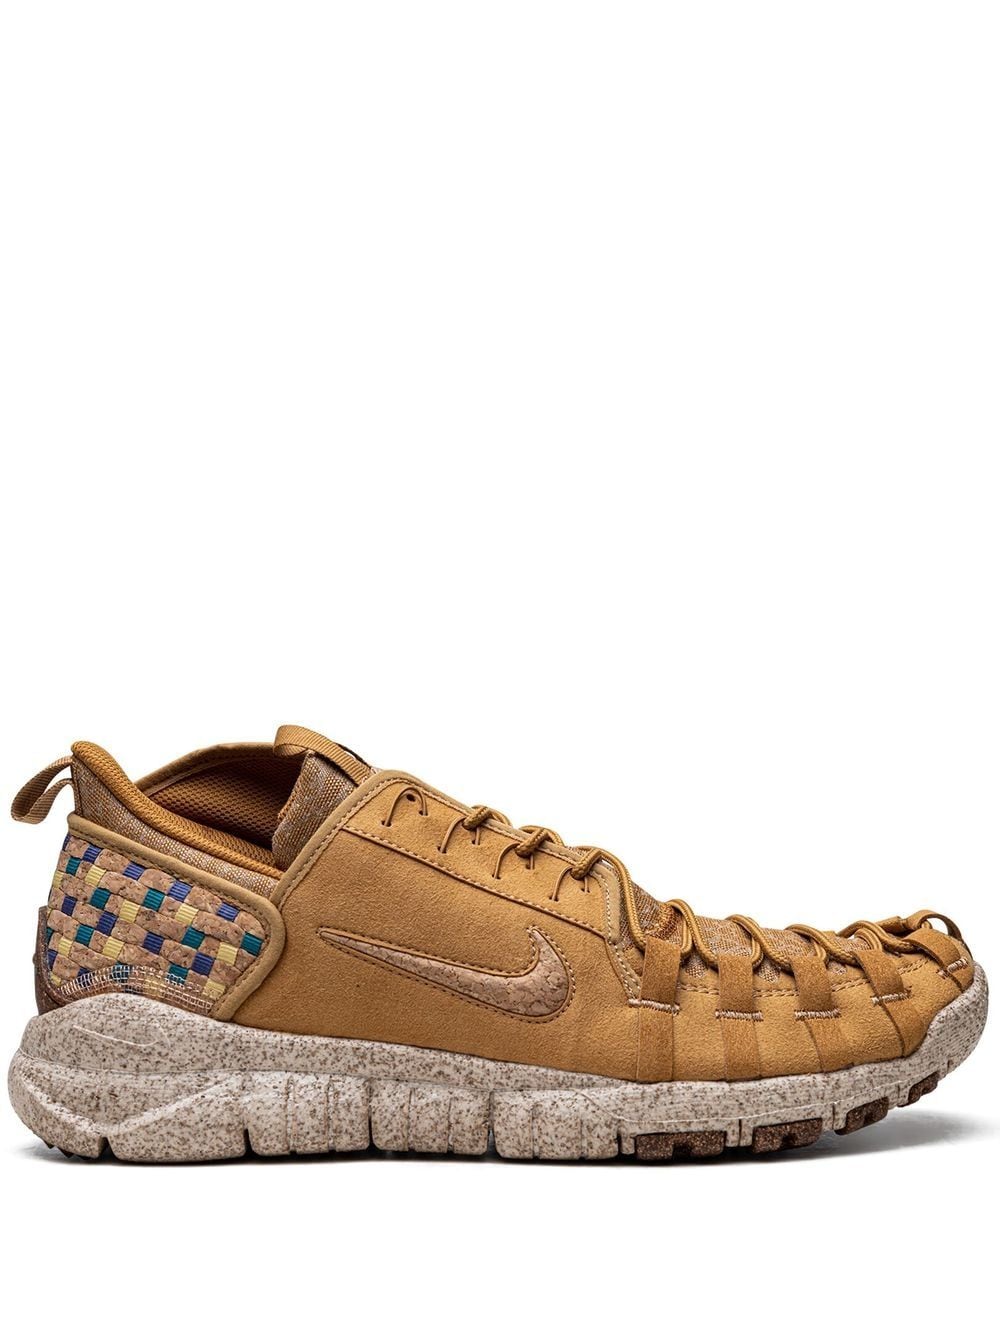 Nike Free Crater Trail Moc Sneakers In Wheat/wheat